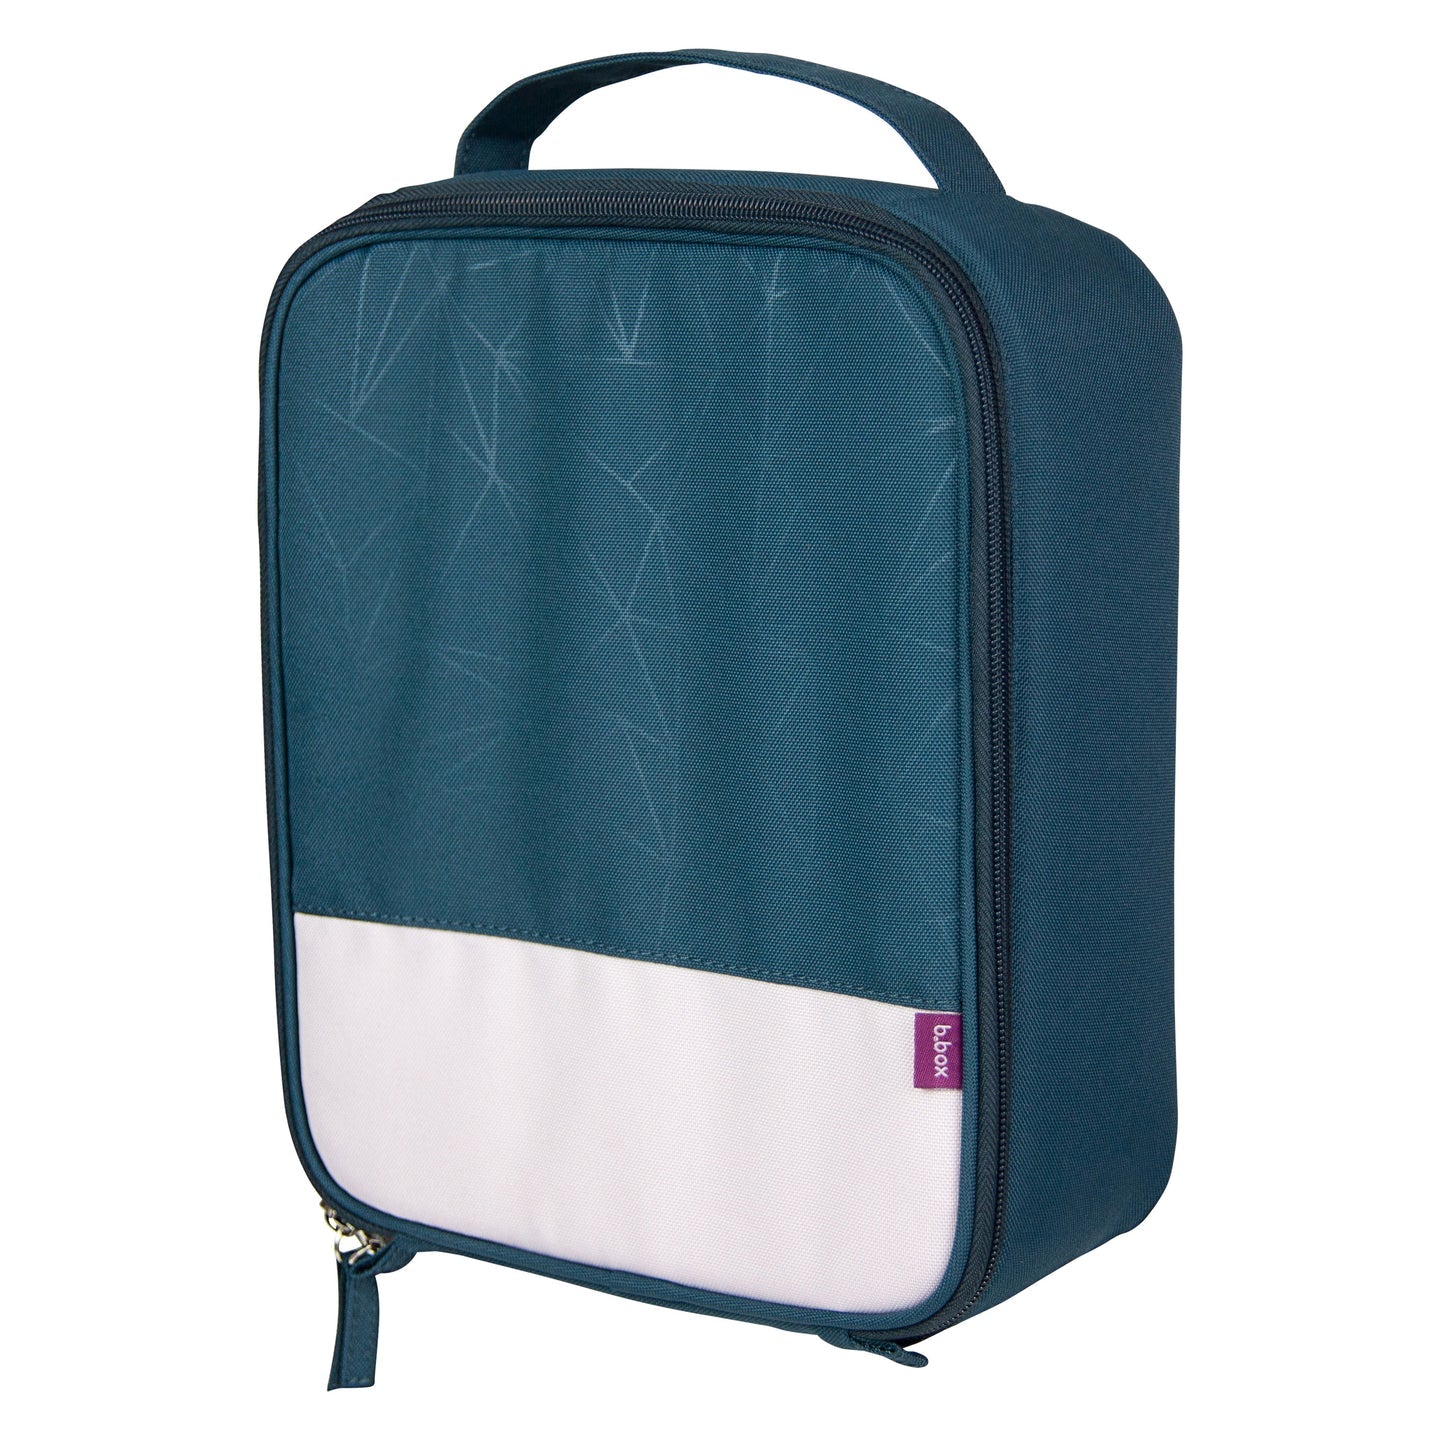 MILTON FLAT LUNCH BOX FOR SCHOOLS, COLLEGES AND OFFICES WITH BAG INSIDE